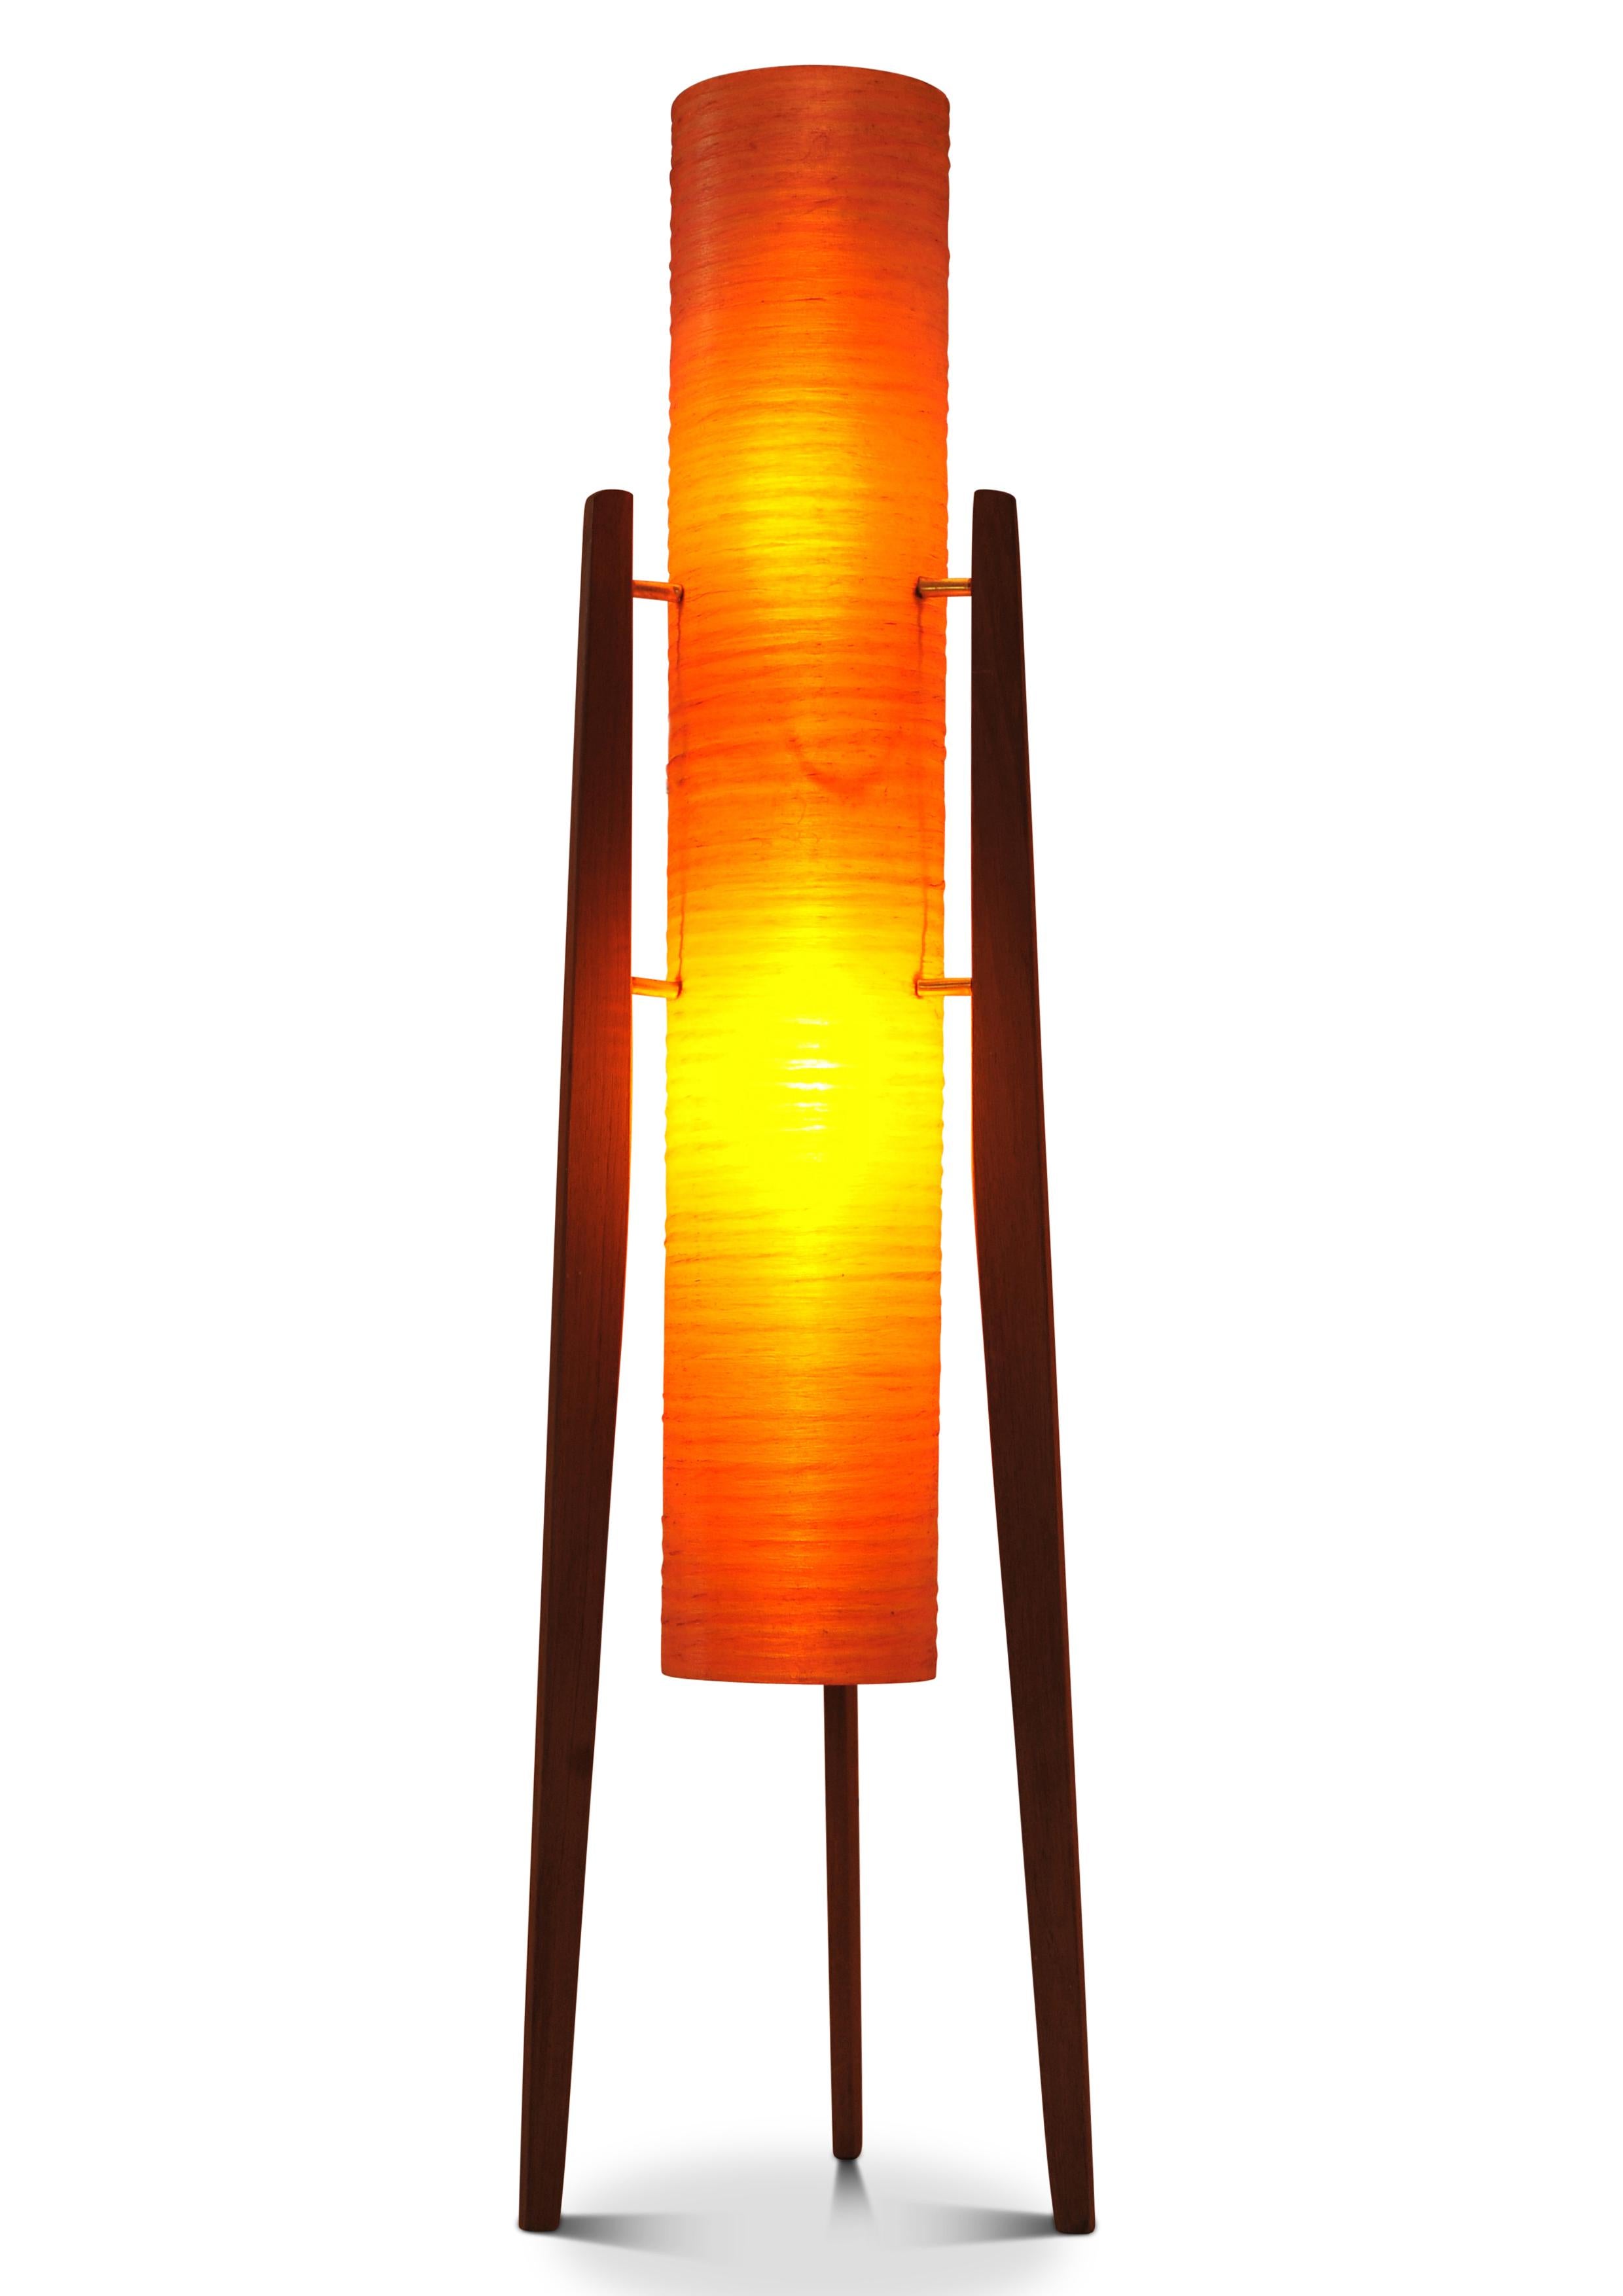 Mid Century Modern Rocket Floor Lamp with a Tripod Teak Frame by Sered Novoplast of Czechoslovakia 1960's
No makers marks or labels

Fitted with a UK plug 

Full height 94cm
Diameter of orange tube 12.5cm
Widest part at wood 22cm
Deepest part at